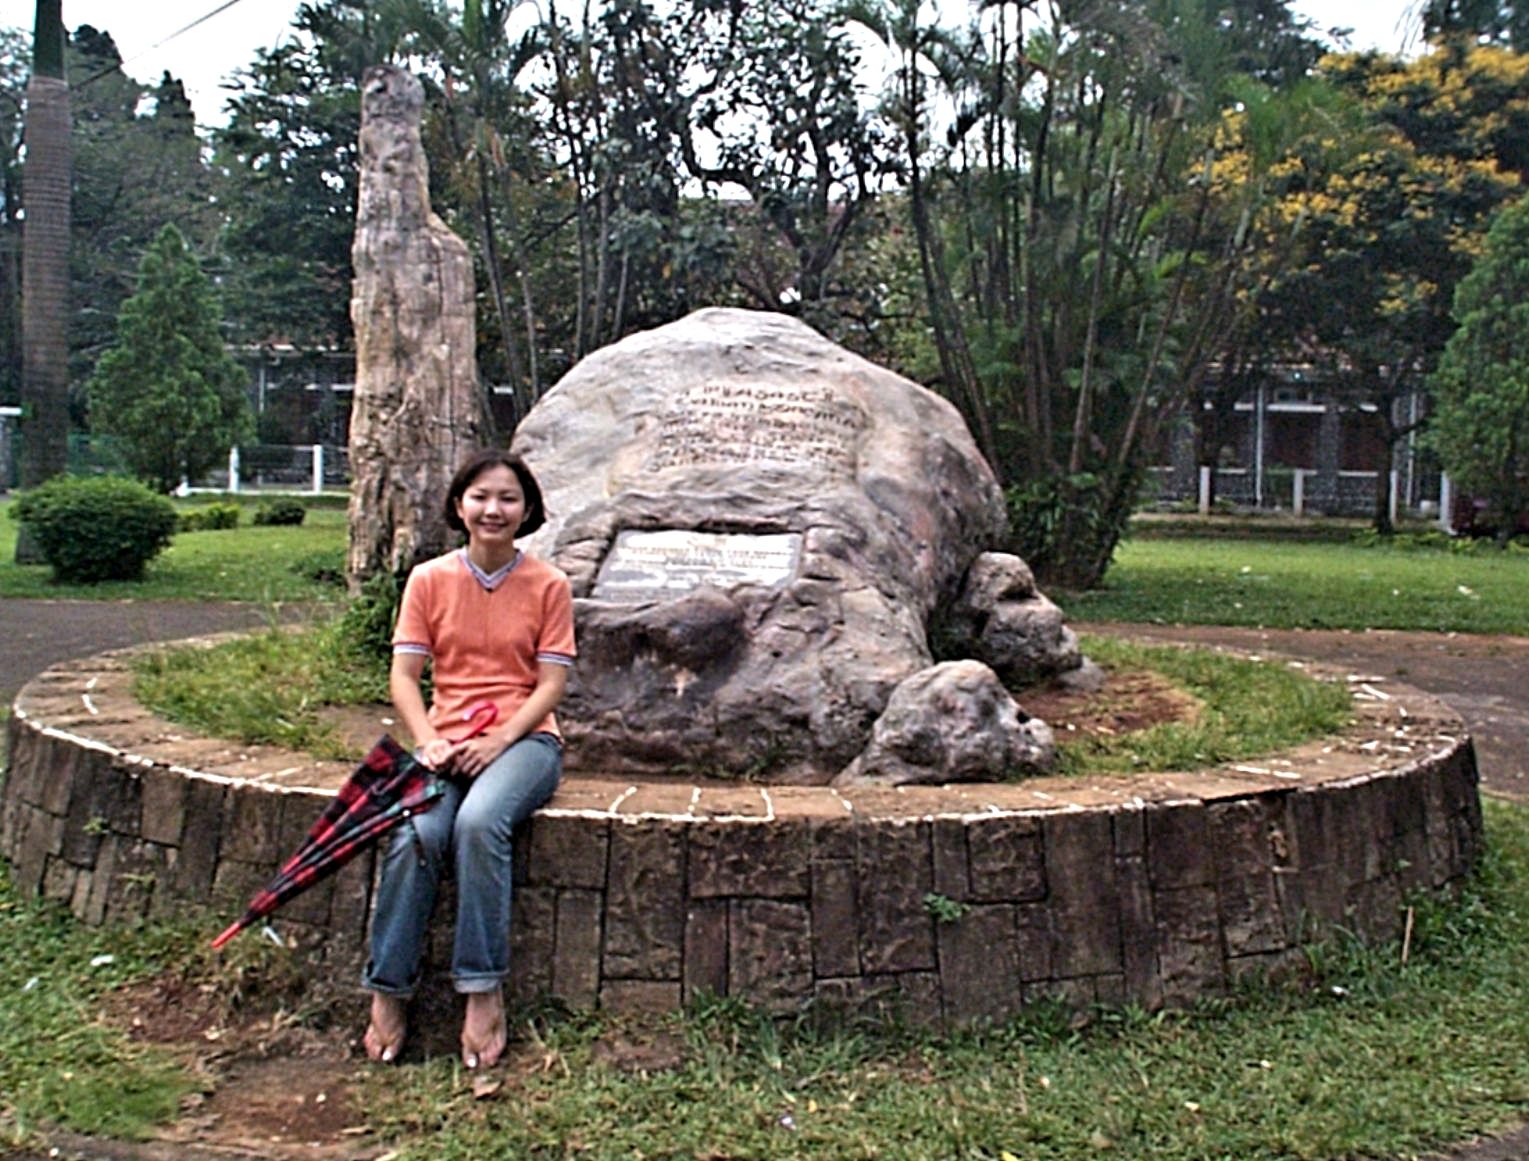 A replica of the "Stone inscription of Ciaruteun", a historical monument of Tarumanagara Era that had once existed in Kencana Park in Bogor. (999-05-30). It was Destroyed and replaced with a night light in 2000s by the hand of ignorant county authority. 嘗てボゴールのクンチャナ公園に存在したタルマ国時代のモニュメント「チアルトゥンの石碑」のレプリカ。2000年代初め無体な県当局の手によって破壊撤去され，常夜灯に置き換えられた。